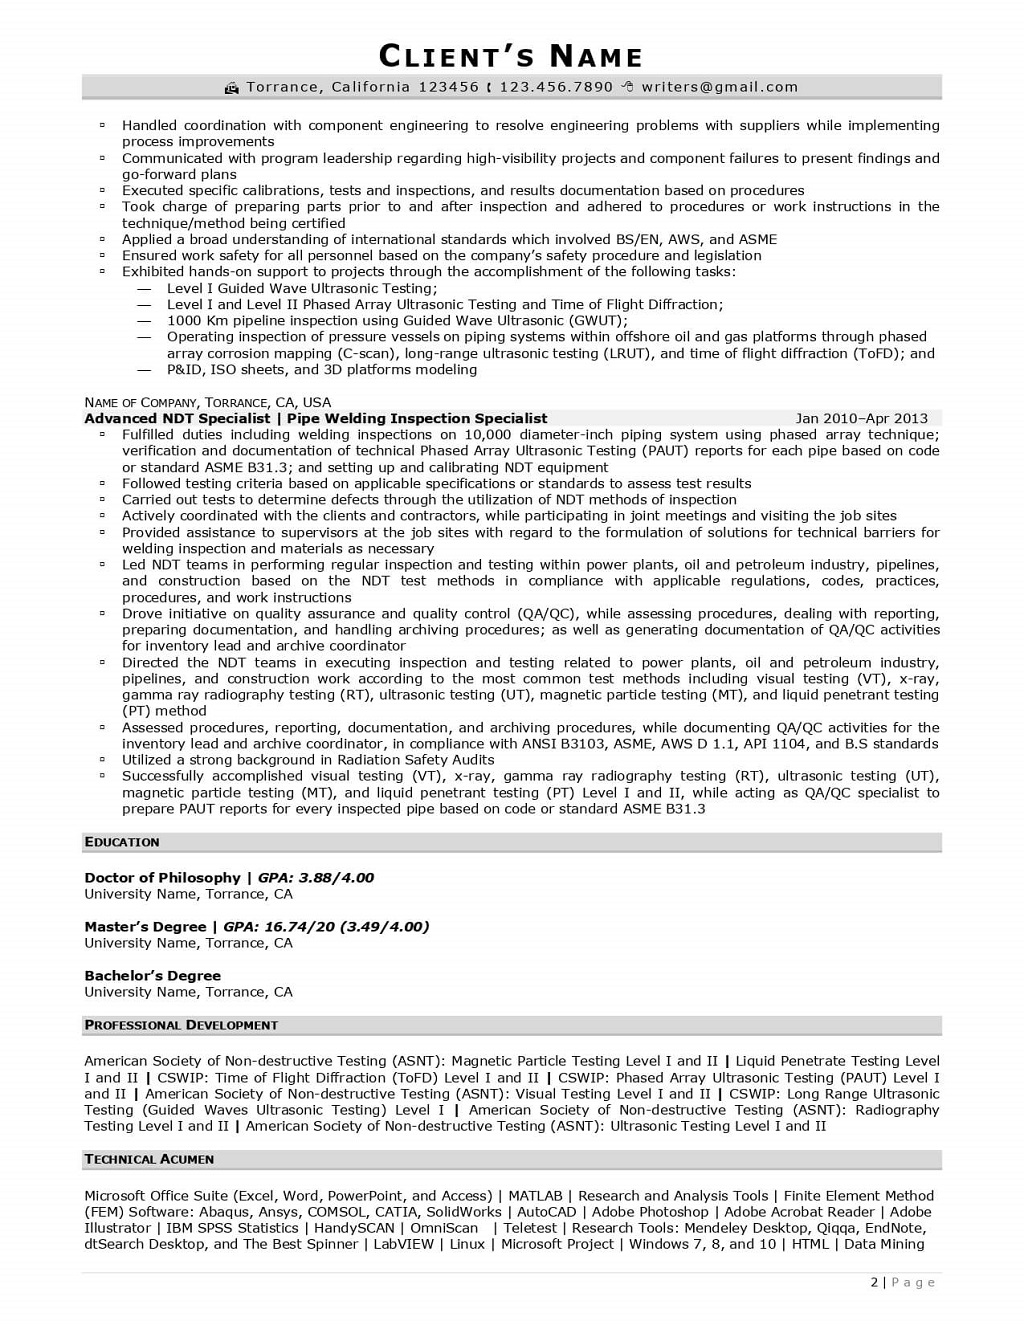 Rpw Oil And Gas Resume Example Page 2